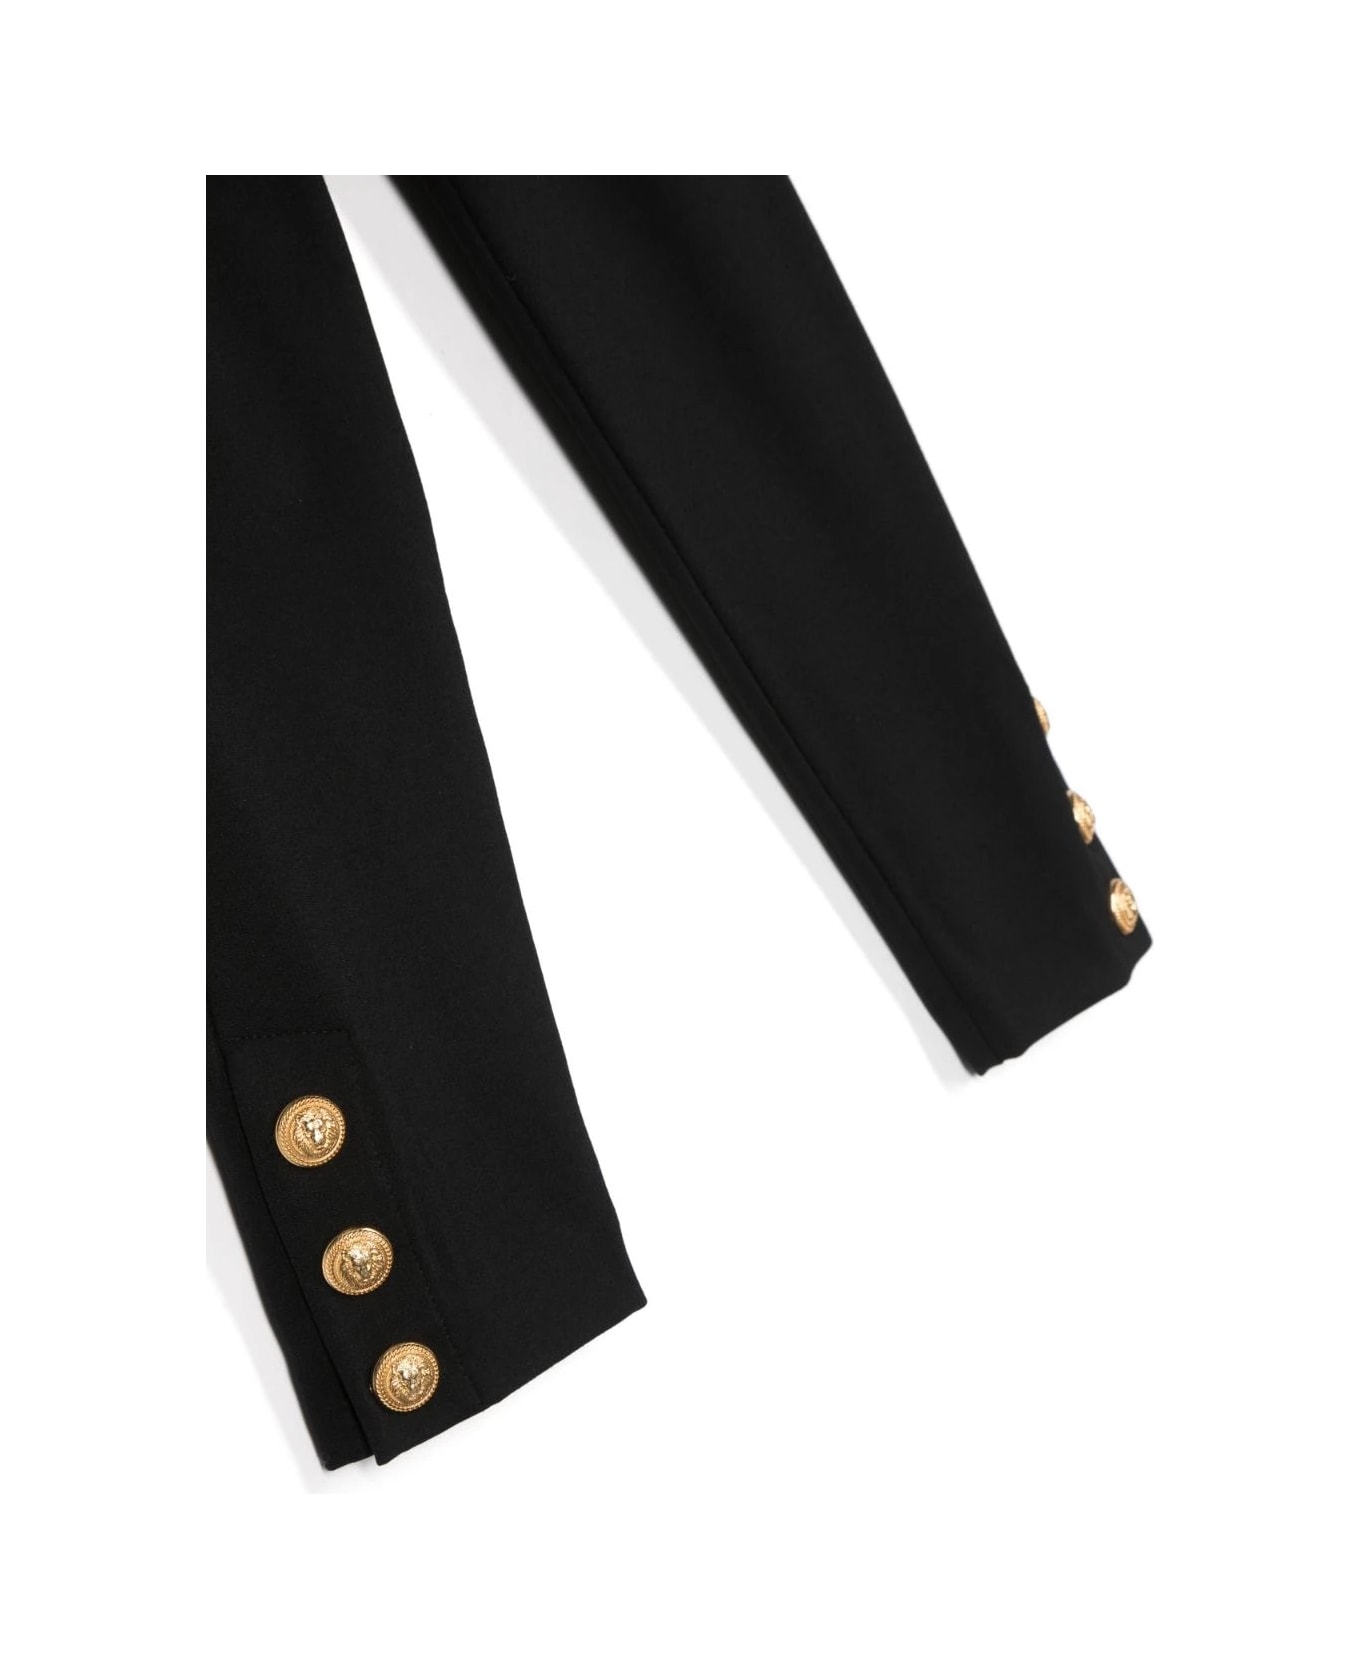 Balmain Black High Waist Pants With Gold Embossed Buttons - Black ボトムス